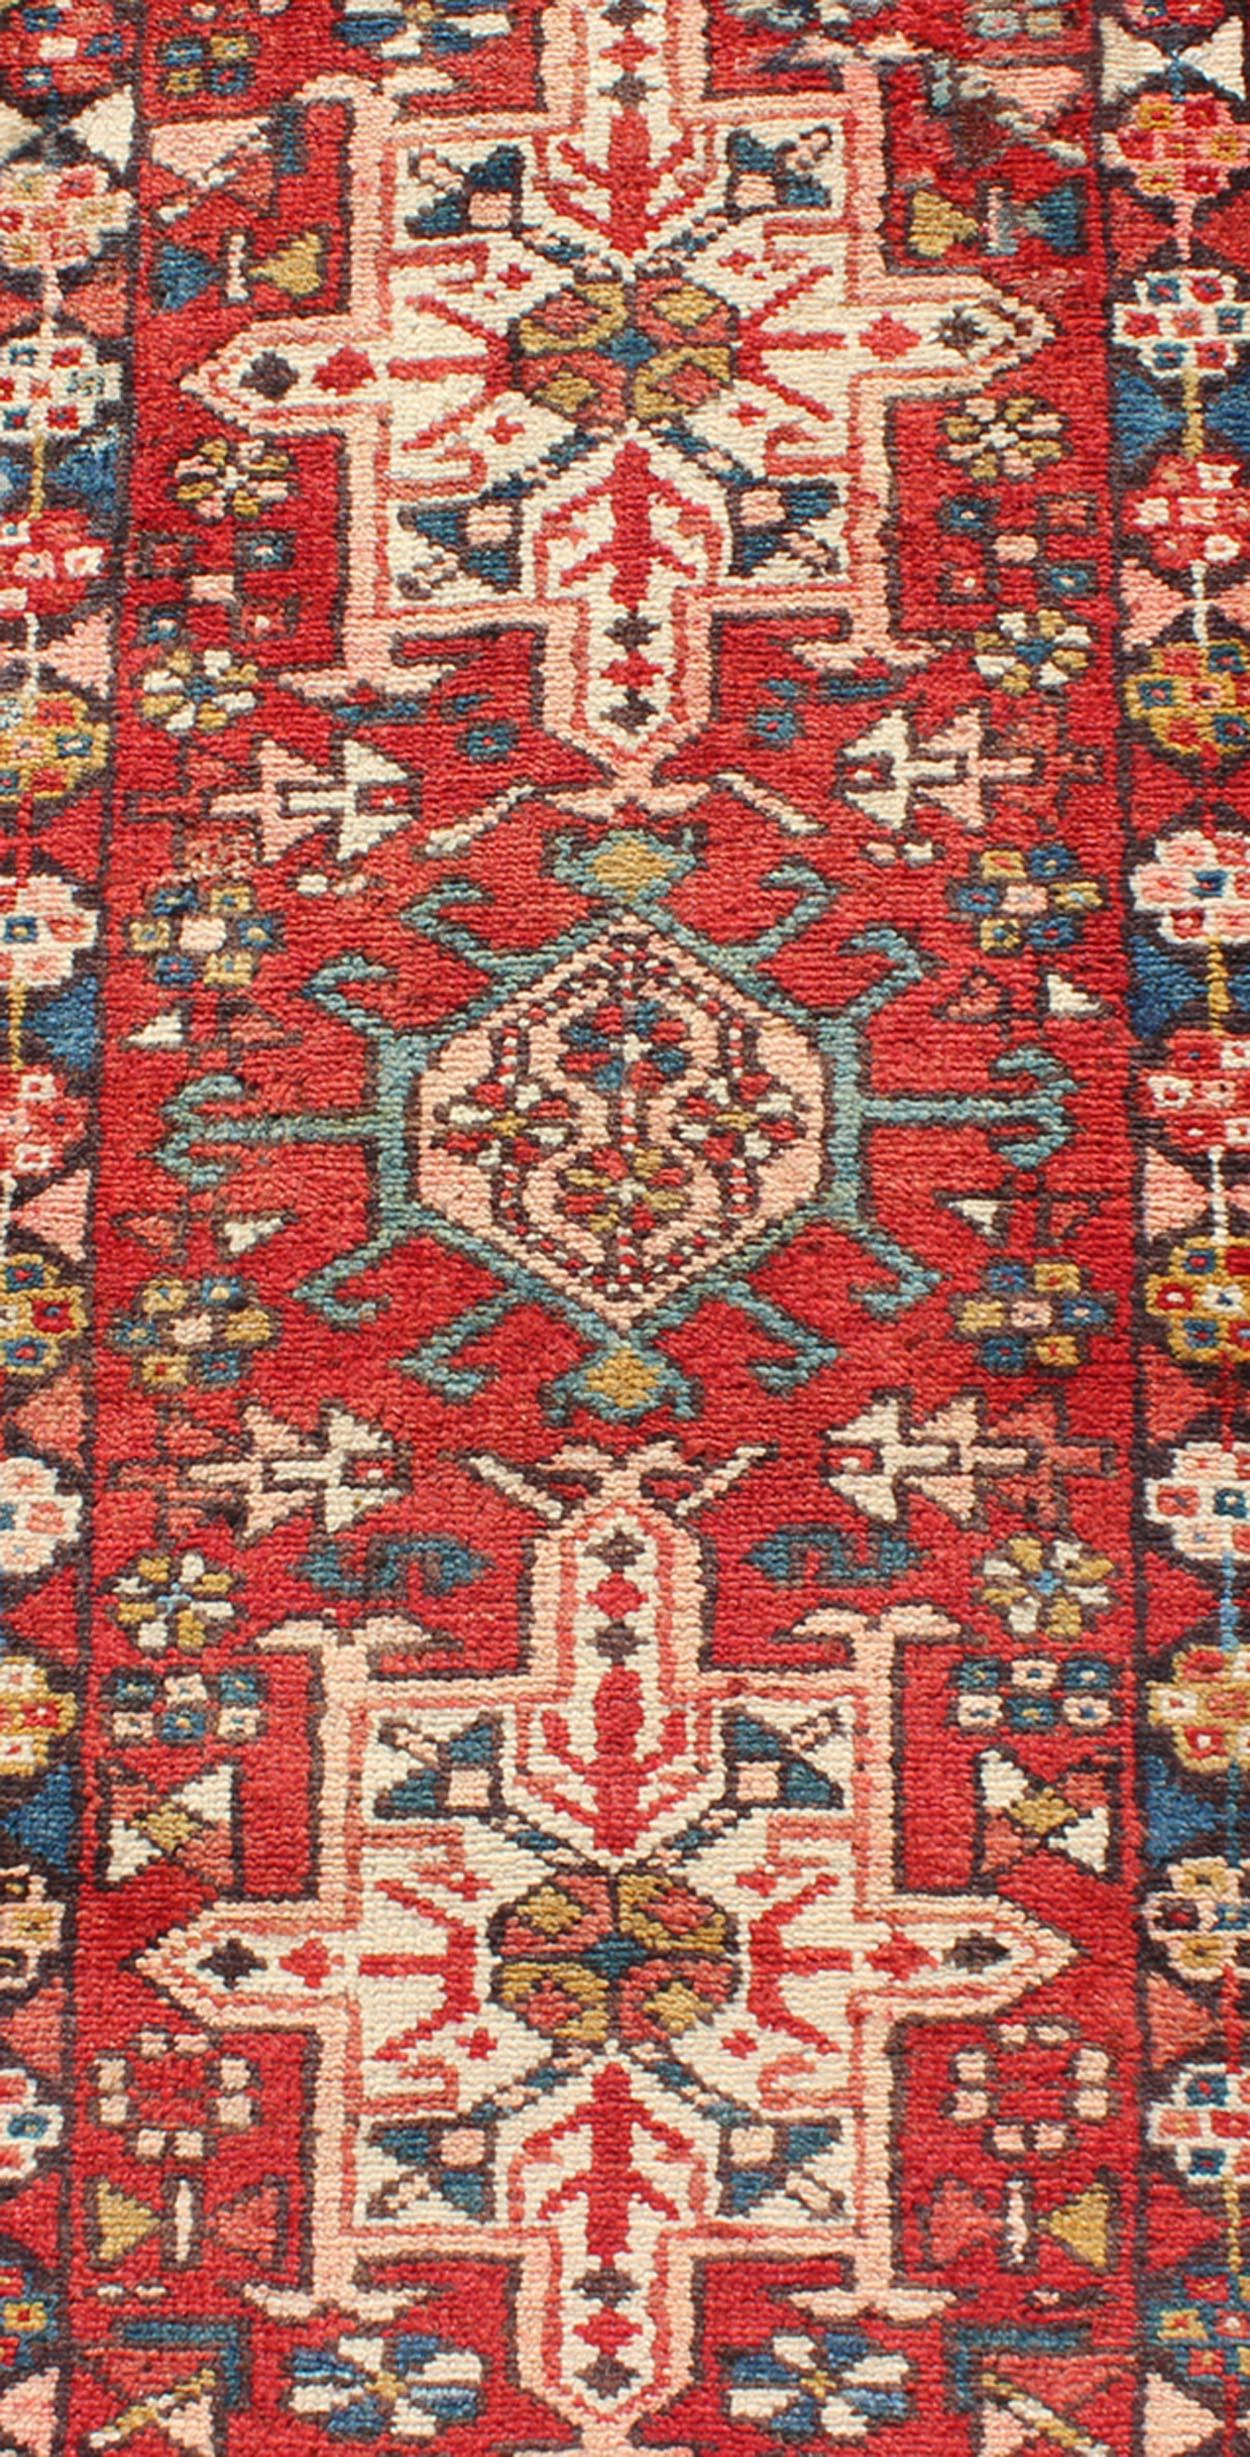 This mid-20th century, handwoven semi antique Karadjeh runner features a red-colored field imbued with ornate medallions. A beautifully drawn multi-tiered border surrounds the entirety of the piece. The articulation of the motifs is excellent and